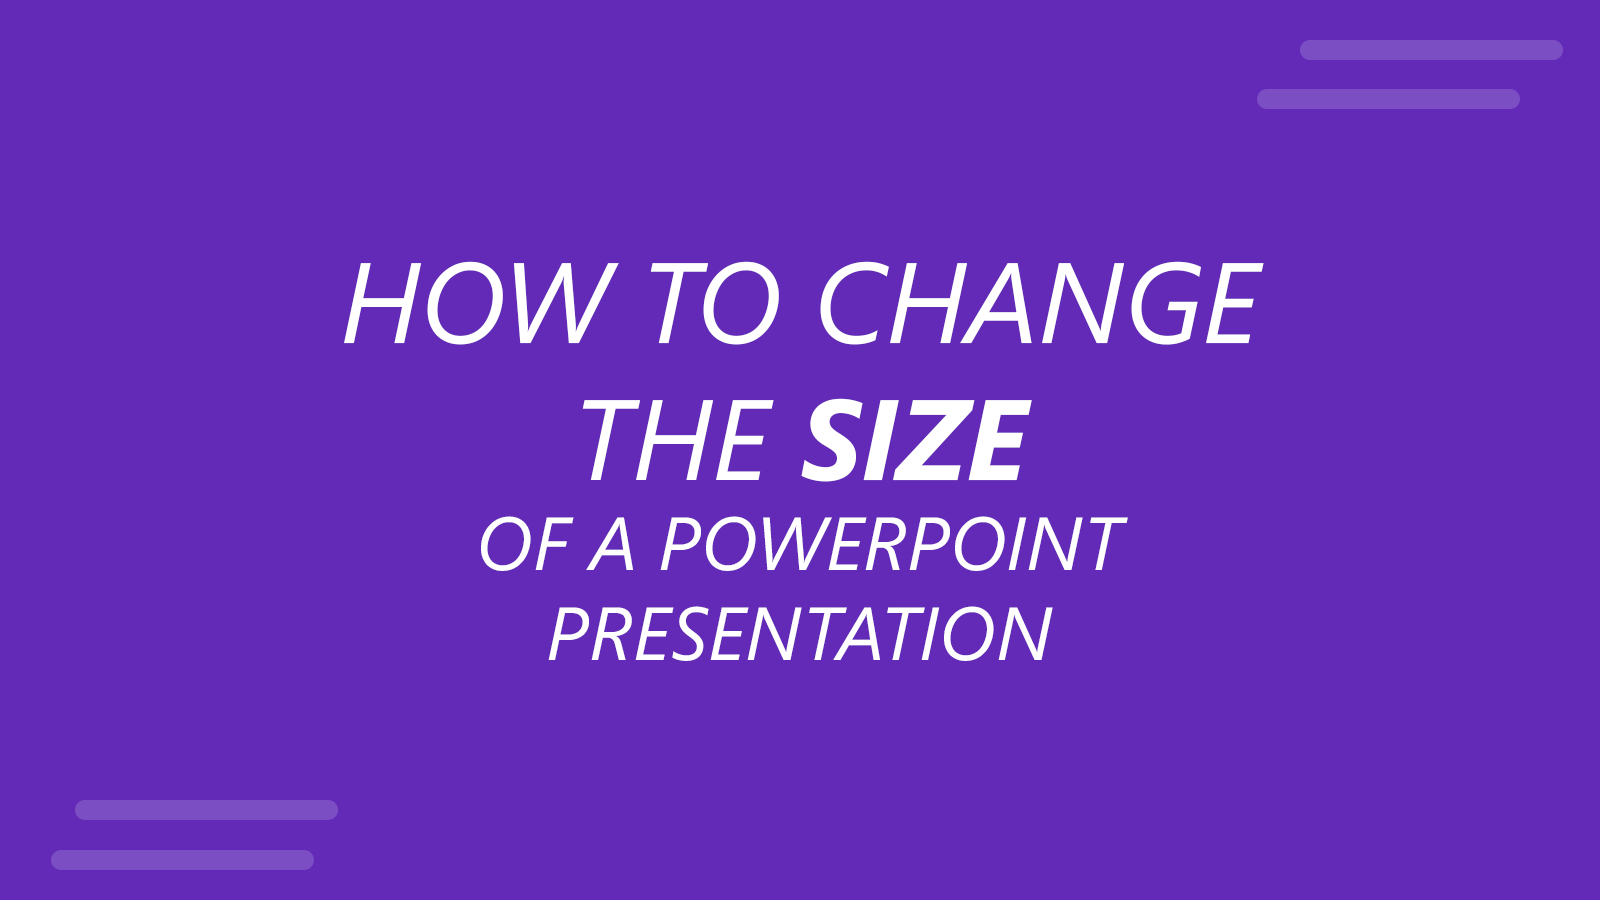 How to change slide size in PowerPoint?
